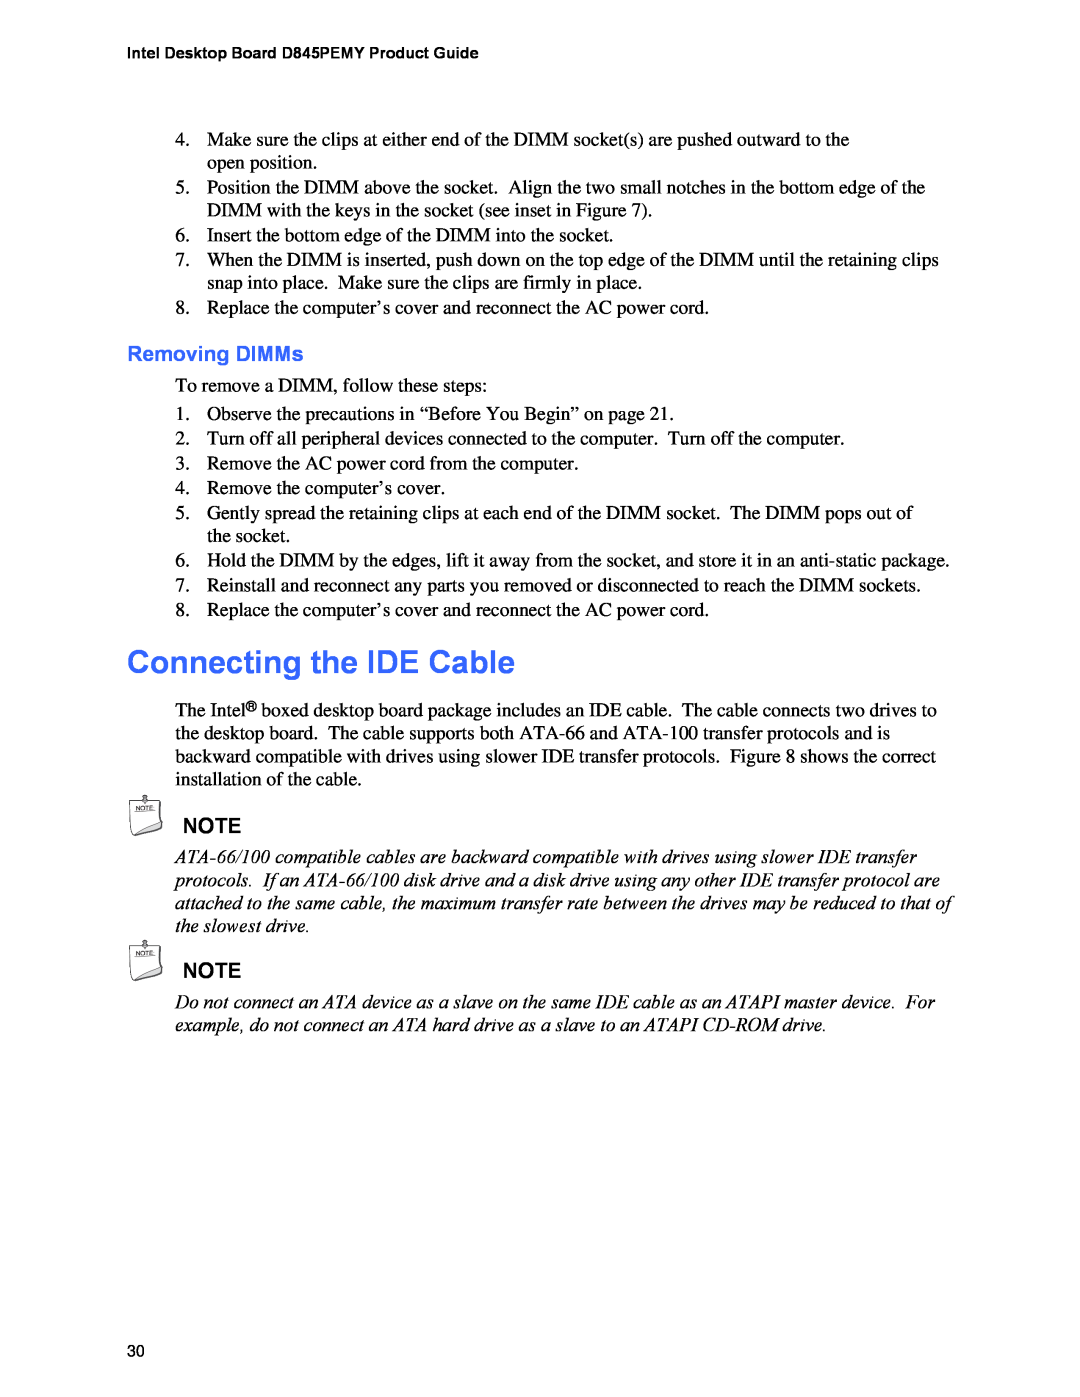 Intel D845PEMY manual Connecting the IDE Cable, Removing DIMMs 